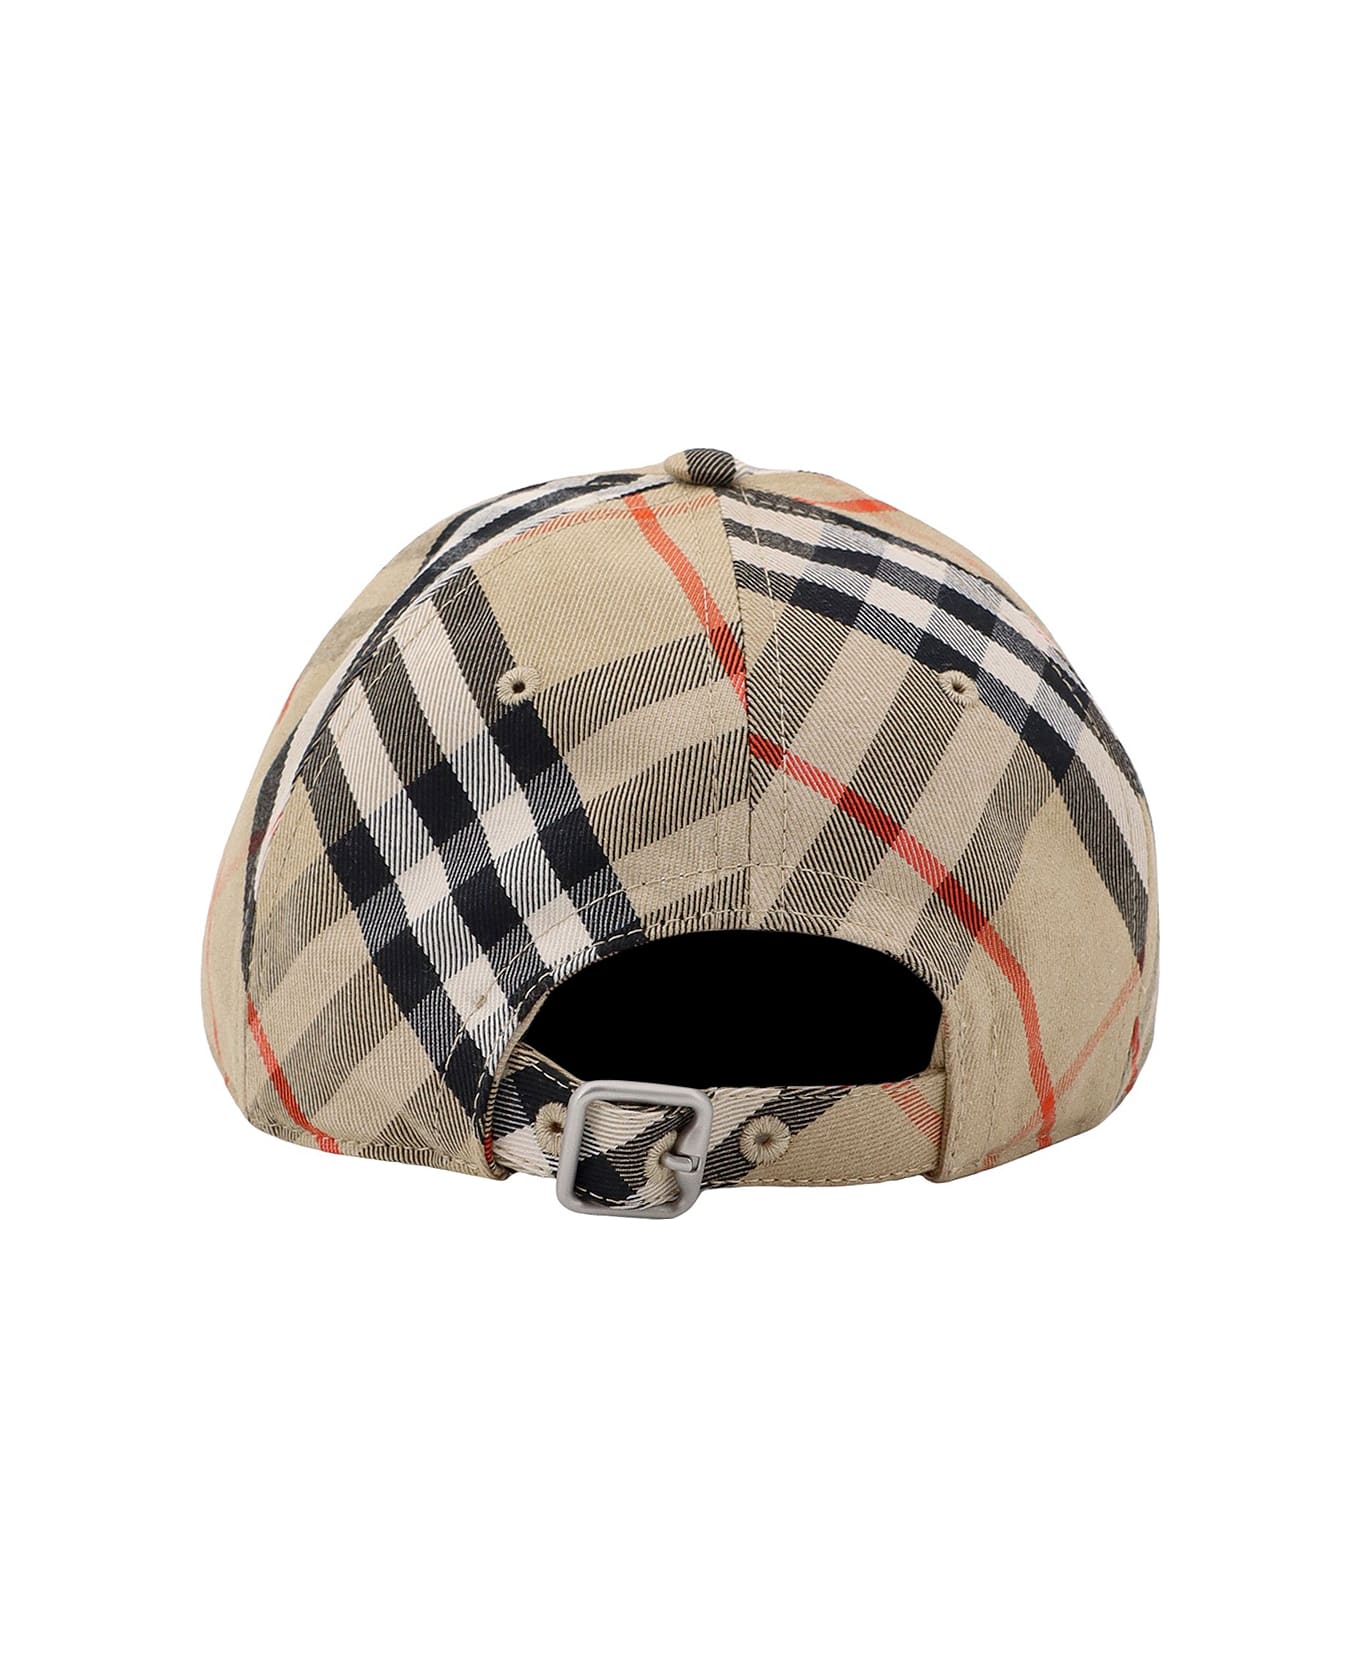 Burberry Hat - Red